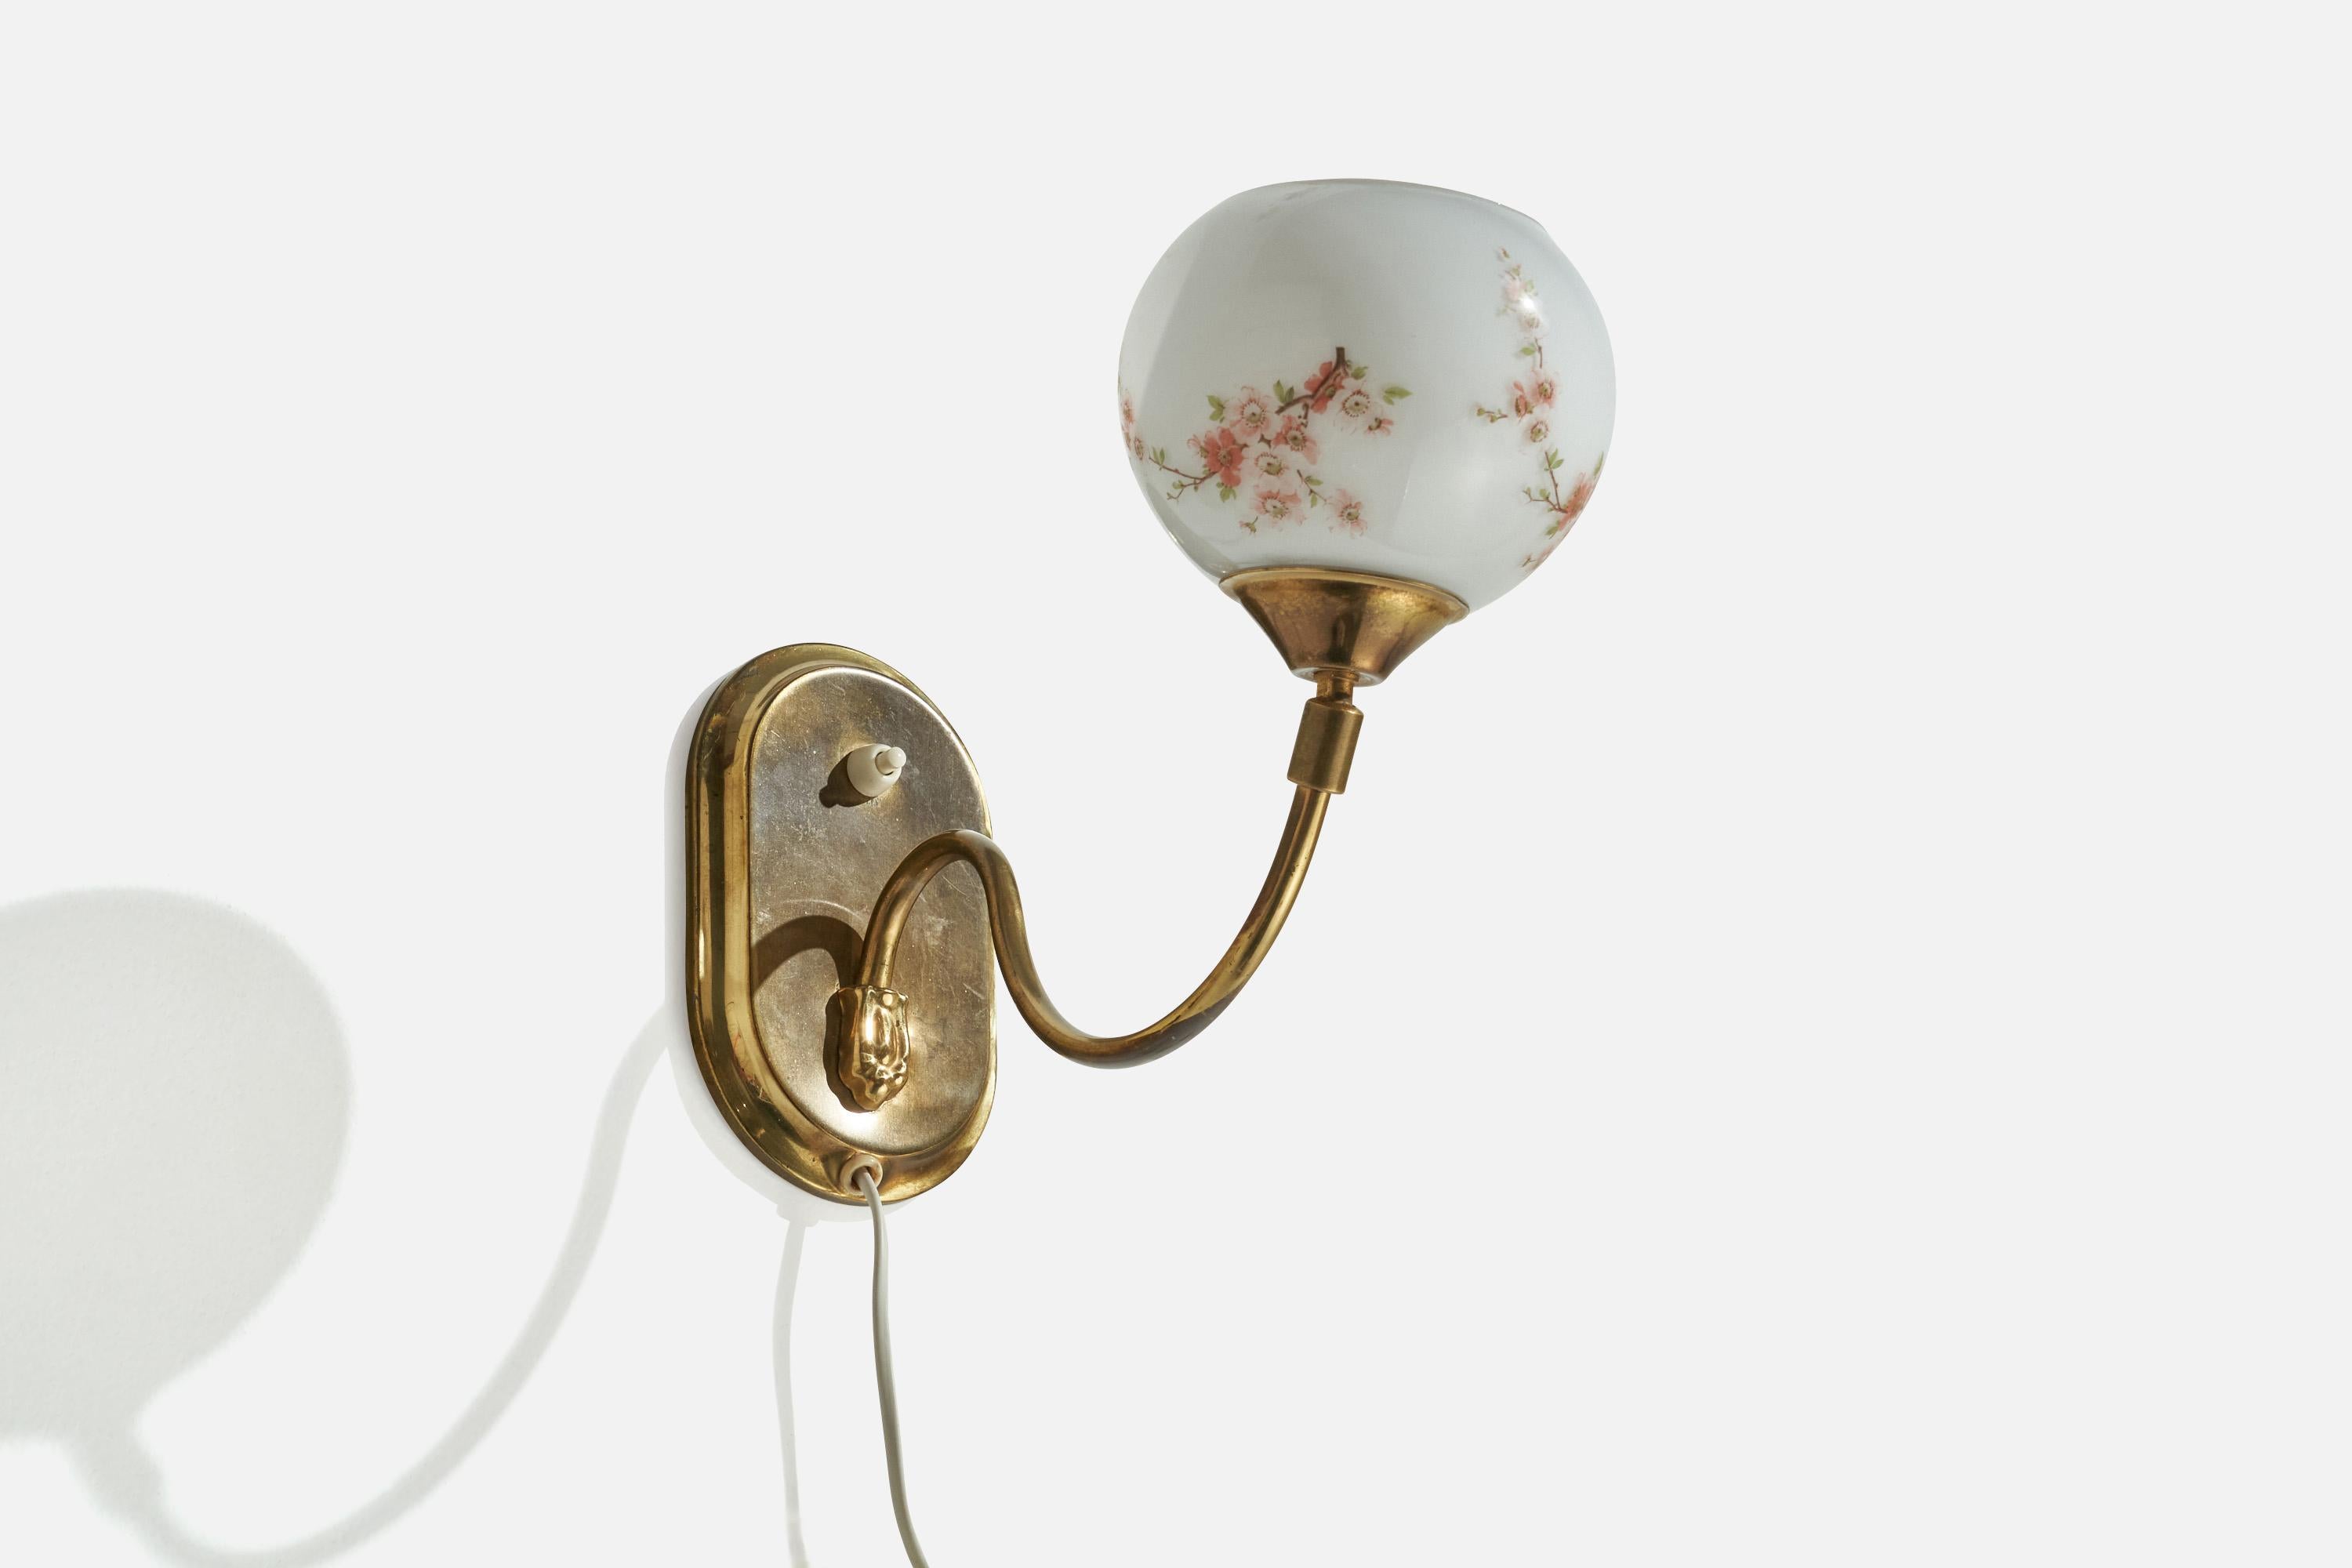 A brass and floral printed opaline glass wall light or table lamp designed and produced in Sweden, c. 1940s.

Overall Dimensions (inches): 6.5” H x 5” W x 12.5” D
overall dimensions depends on the position of the shade.
Back Plate Dimensions